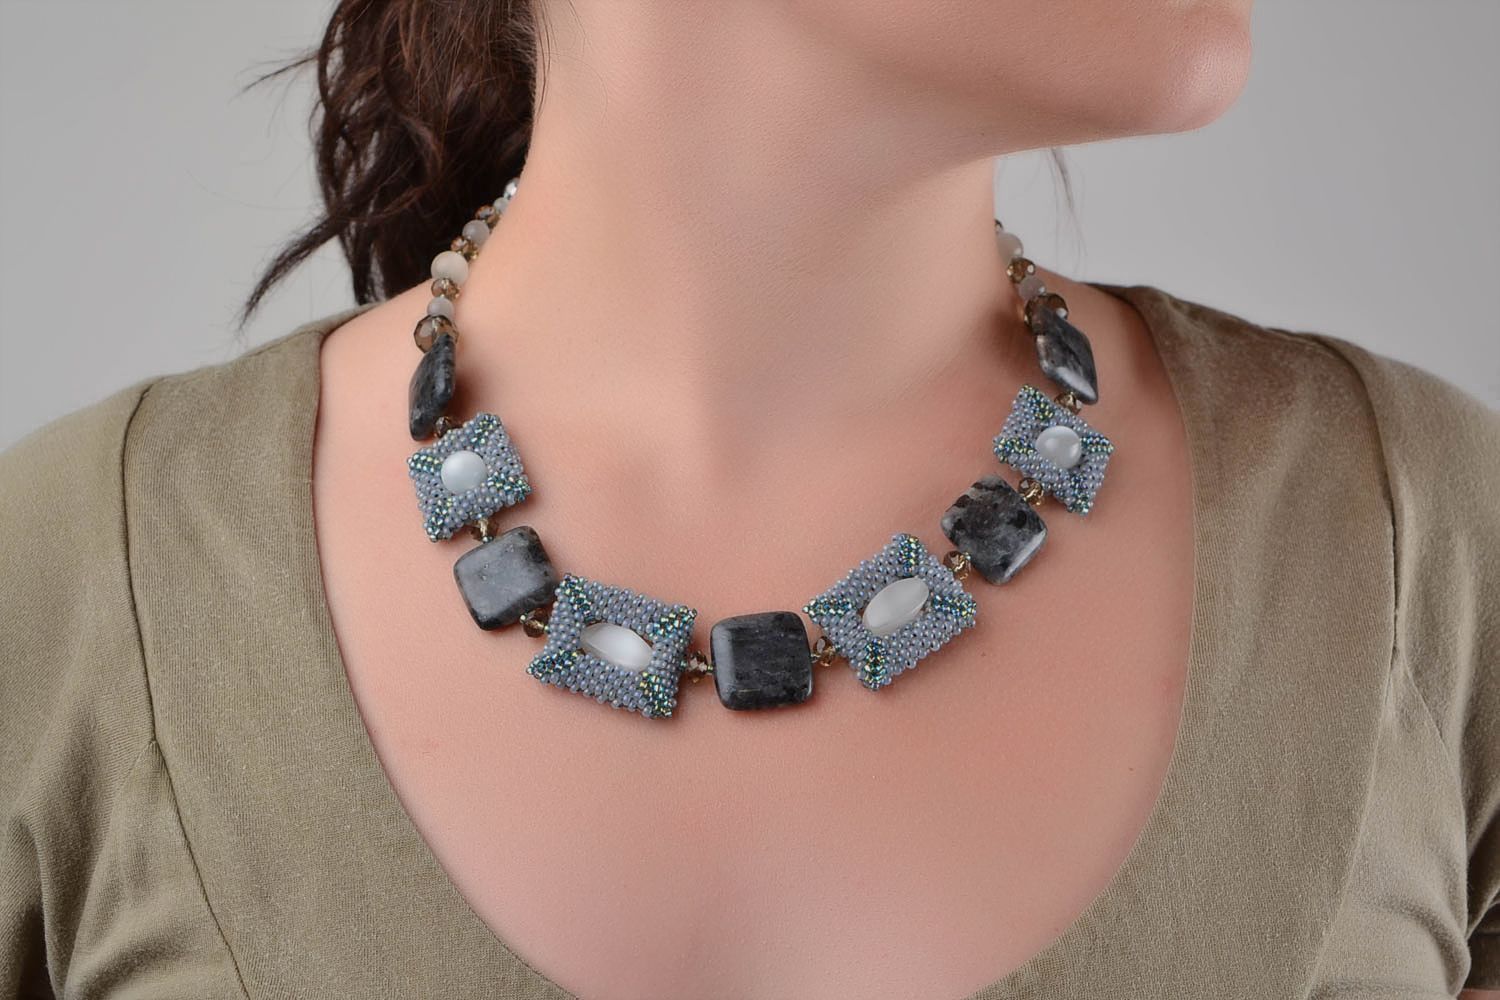 Handmade natural stone and bead woven necklace in severe gray color palette photo 1